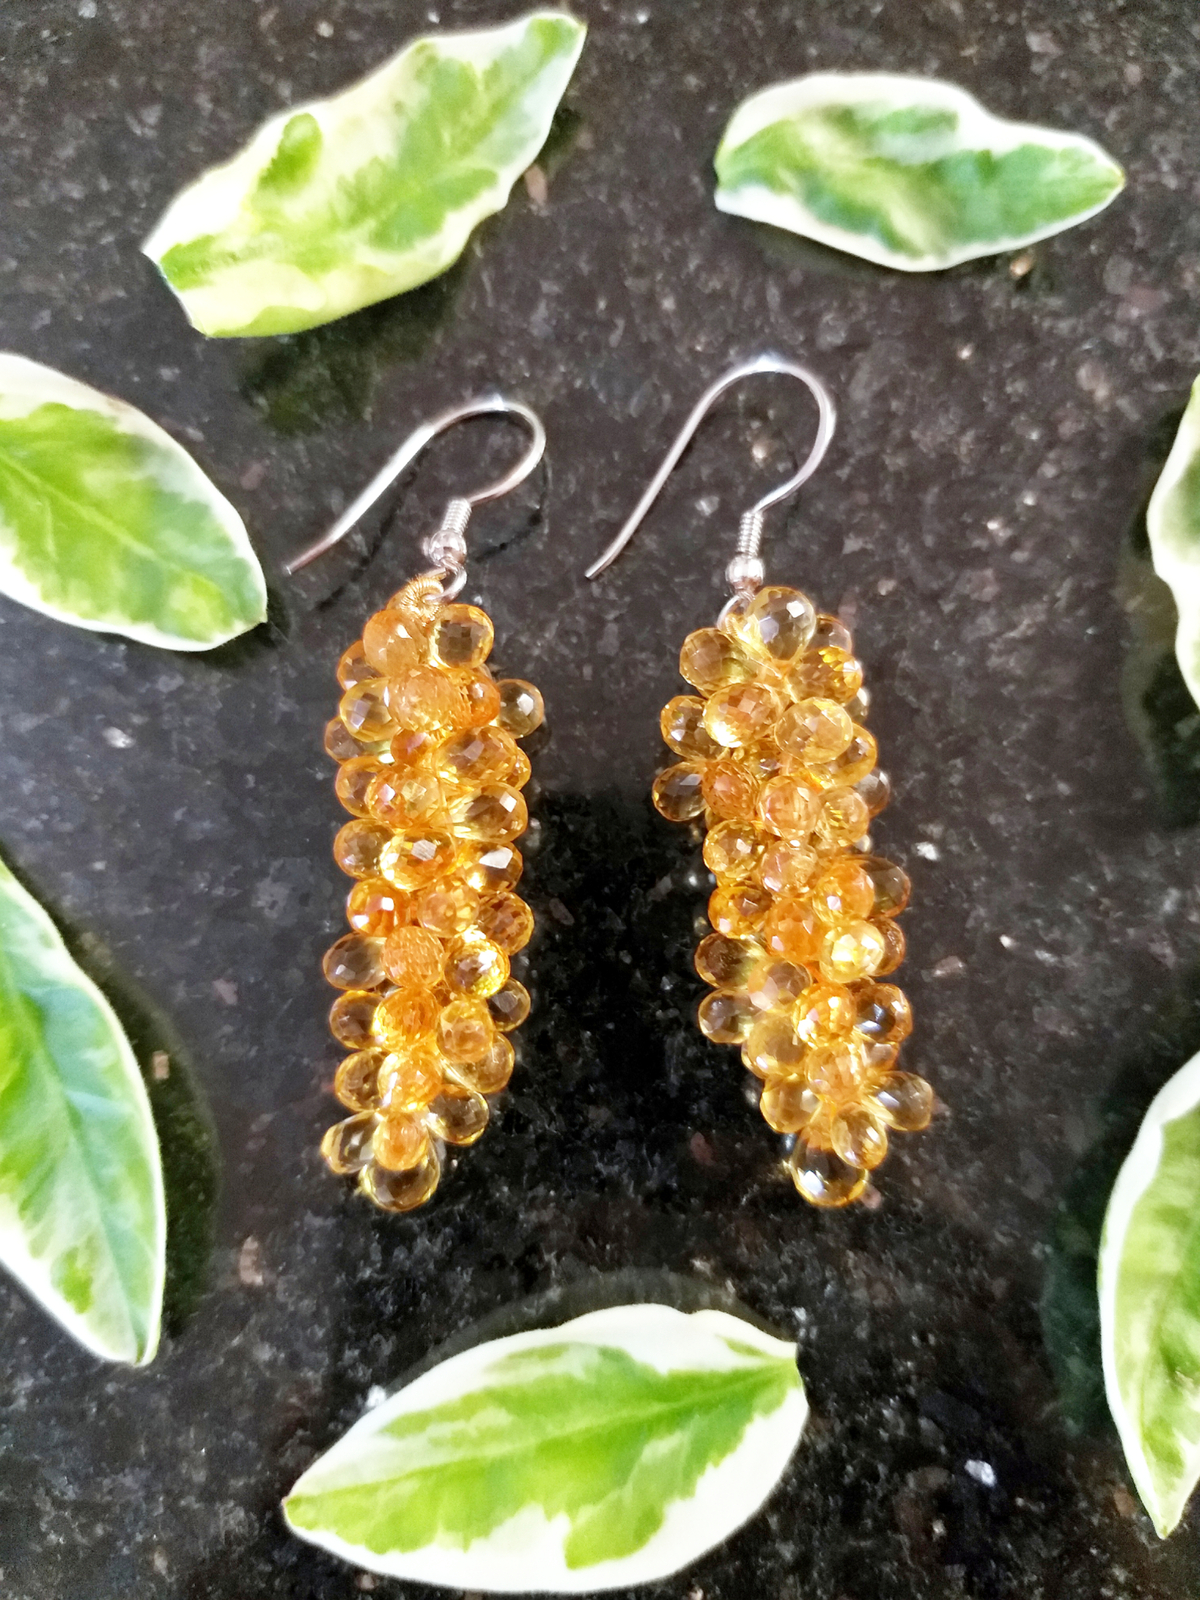 Primary image for Natural Citrine Drops Gemstones Earrings, November Birthstone Jewelry 